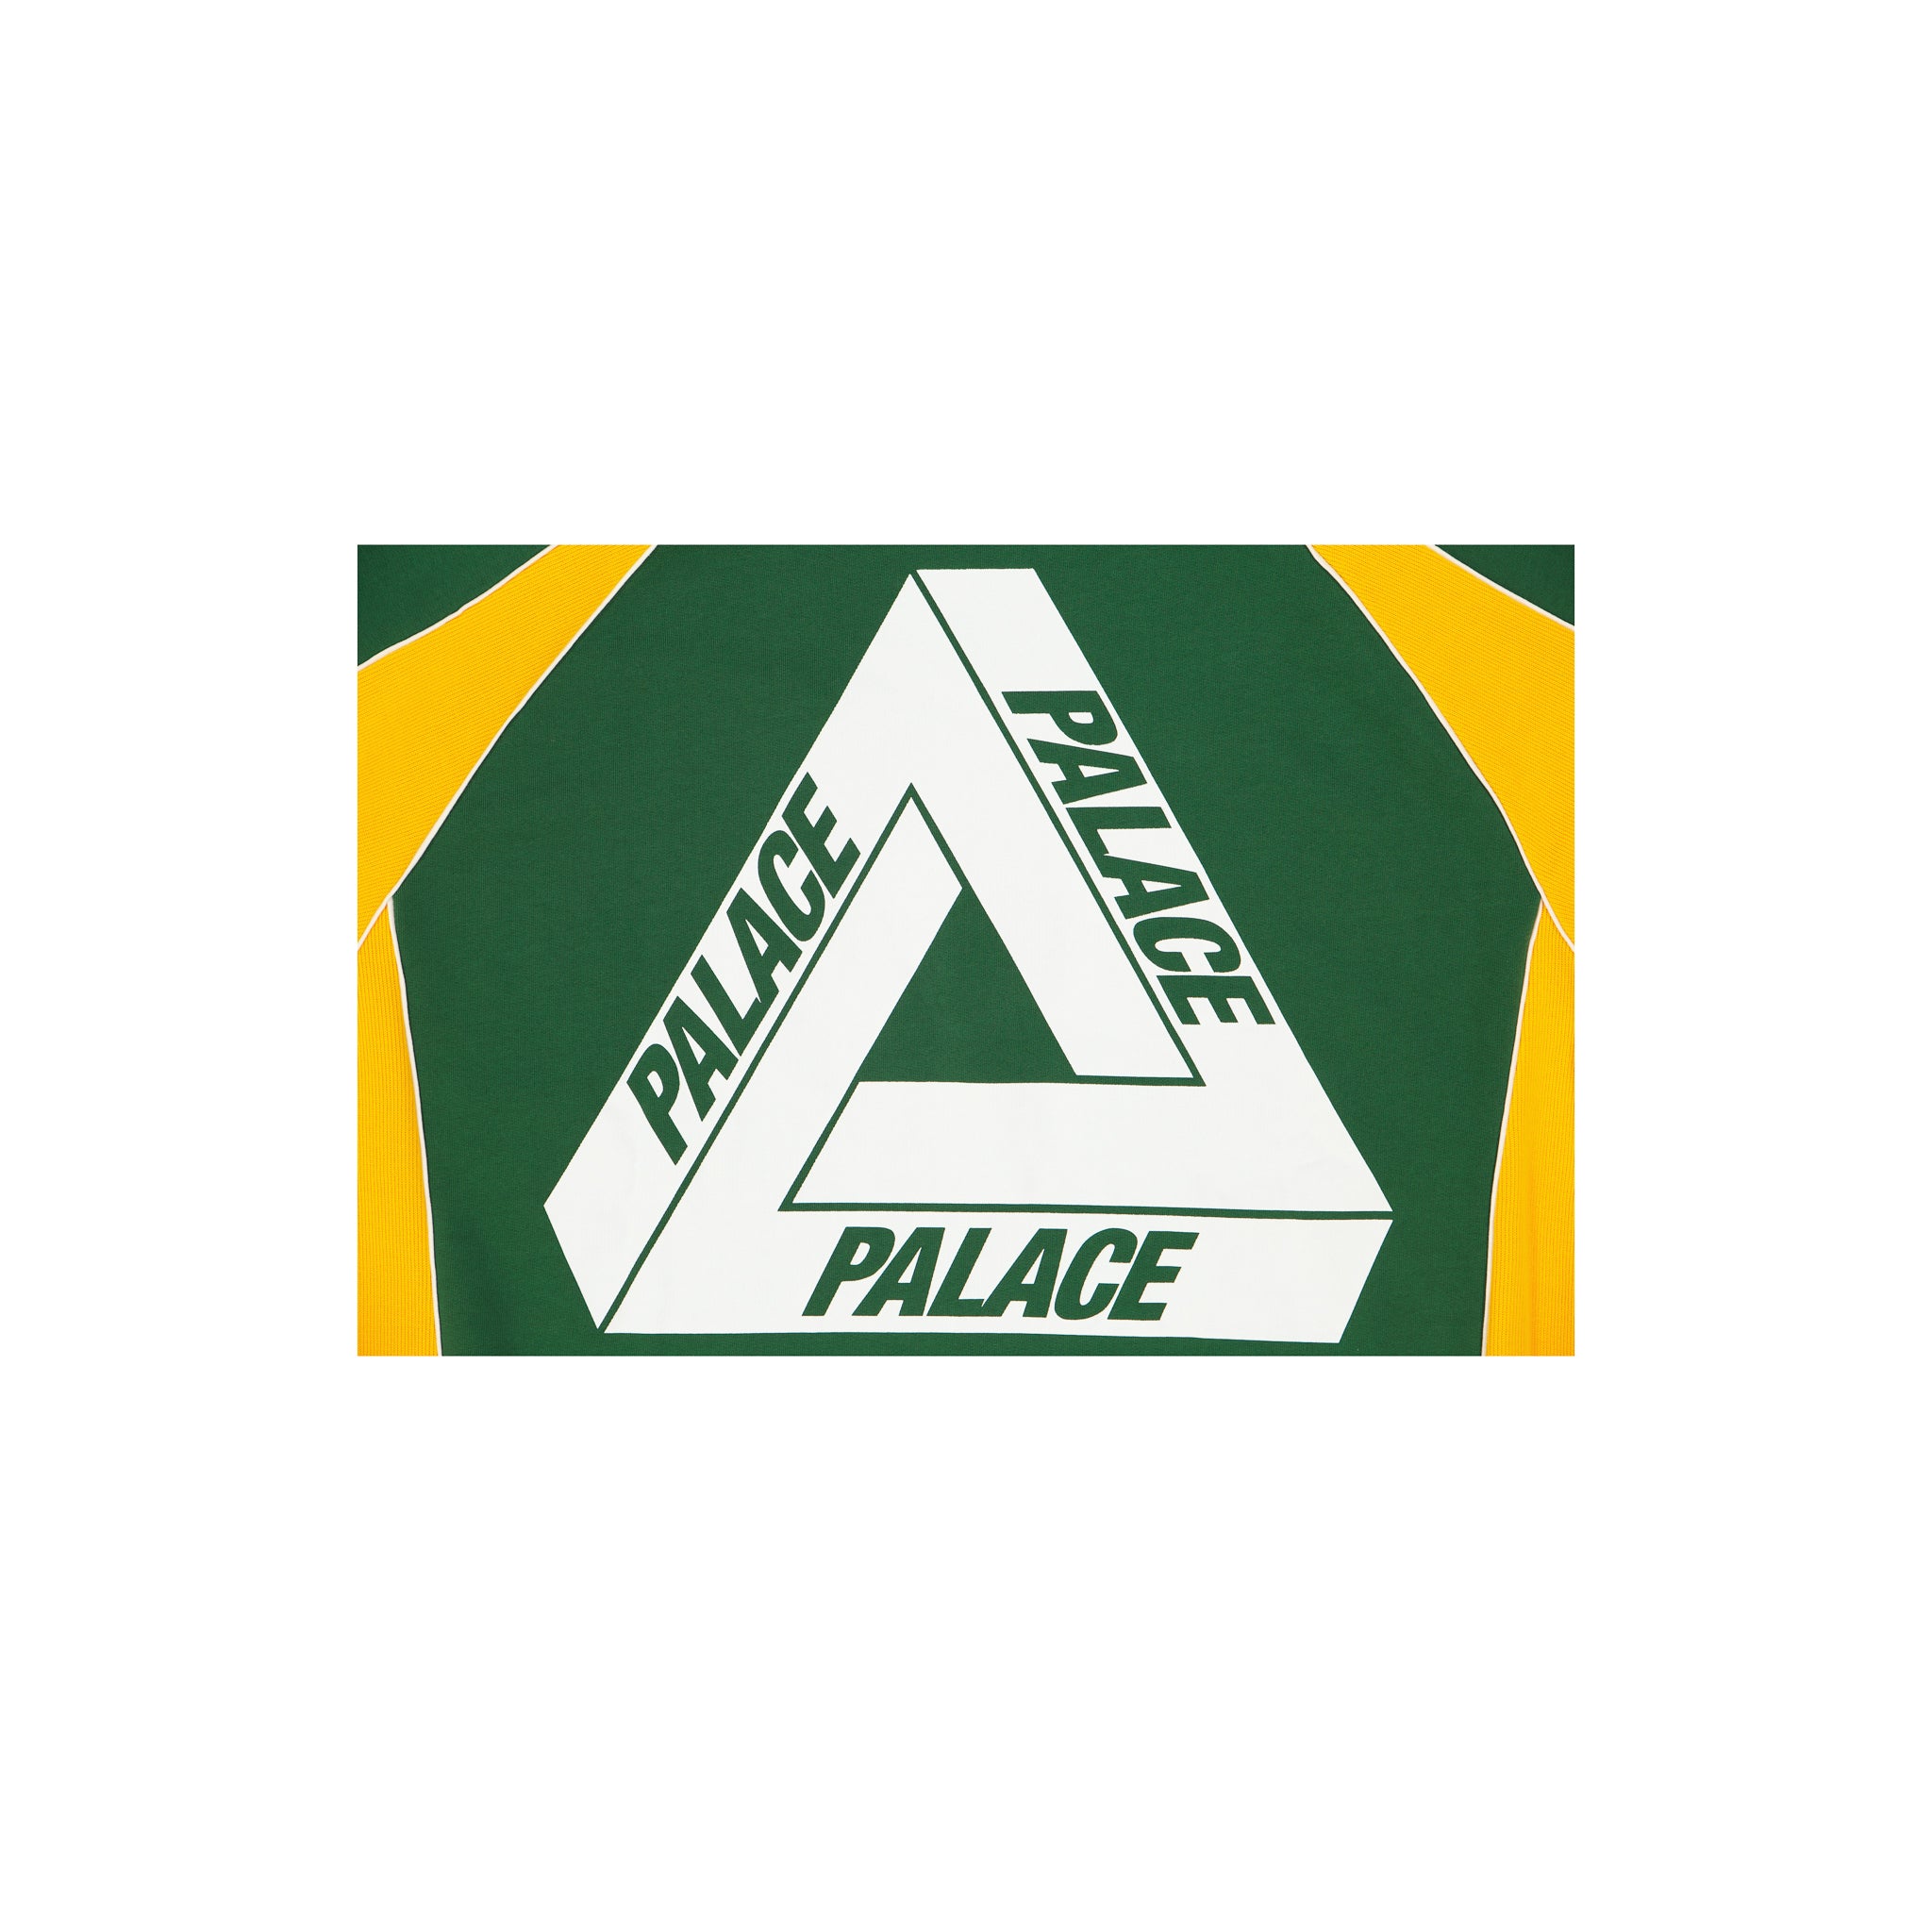 Palace Bowl Out Crew Green